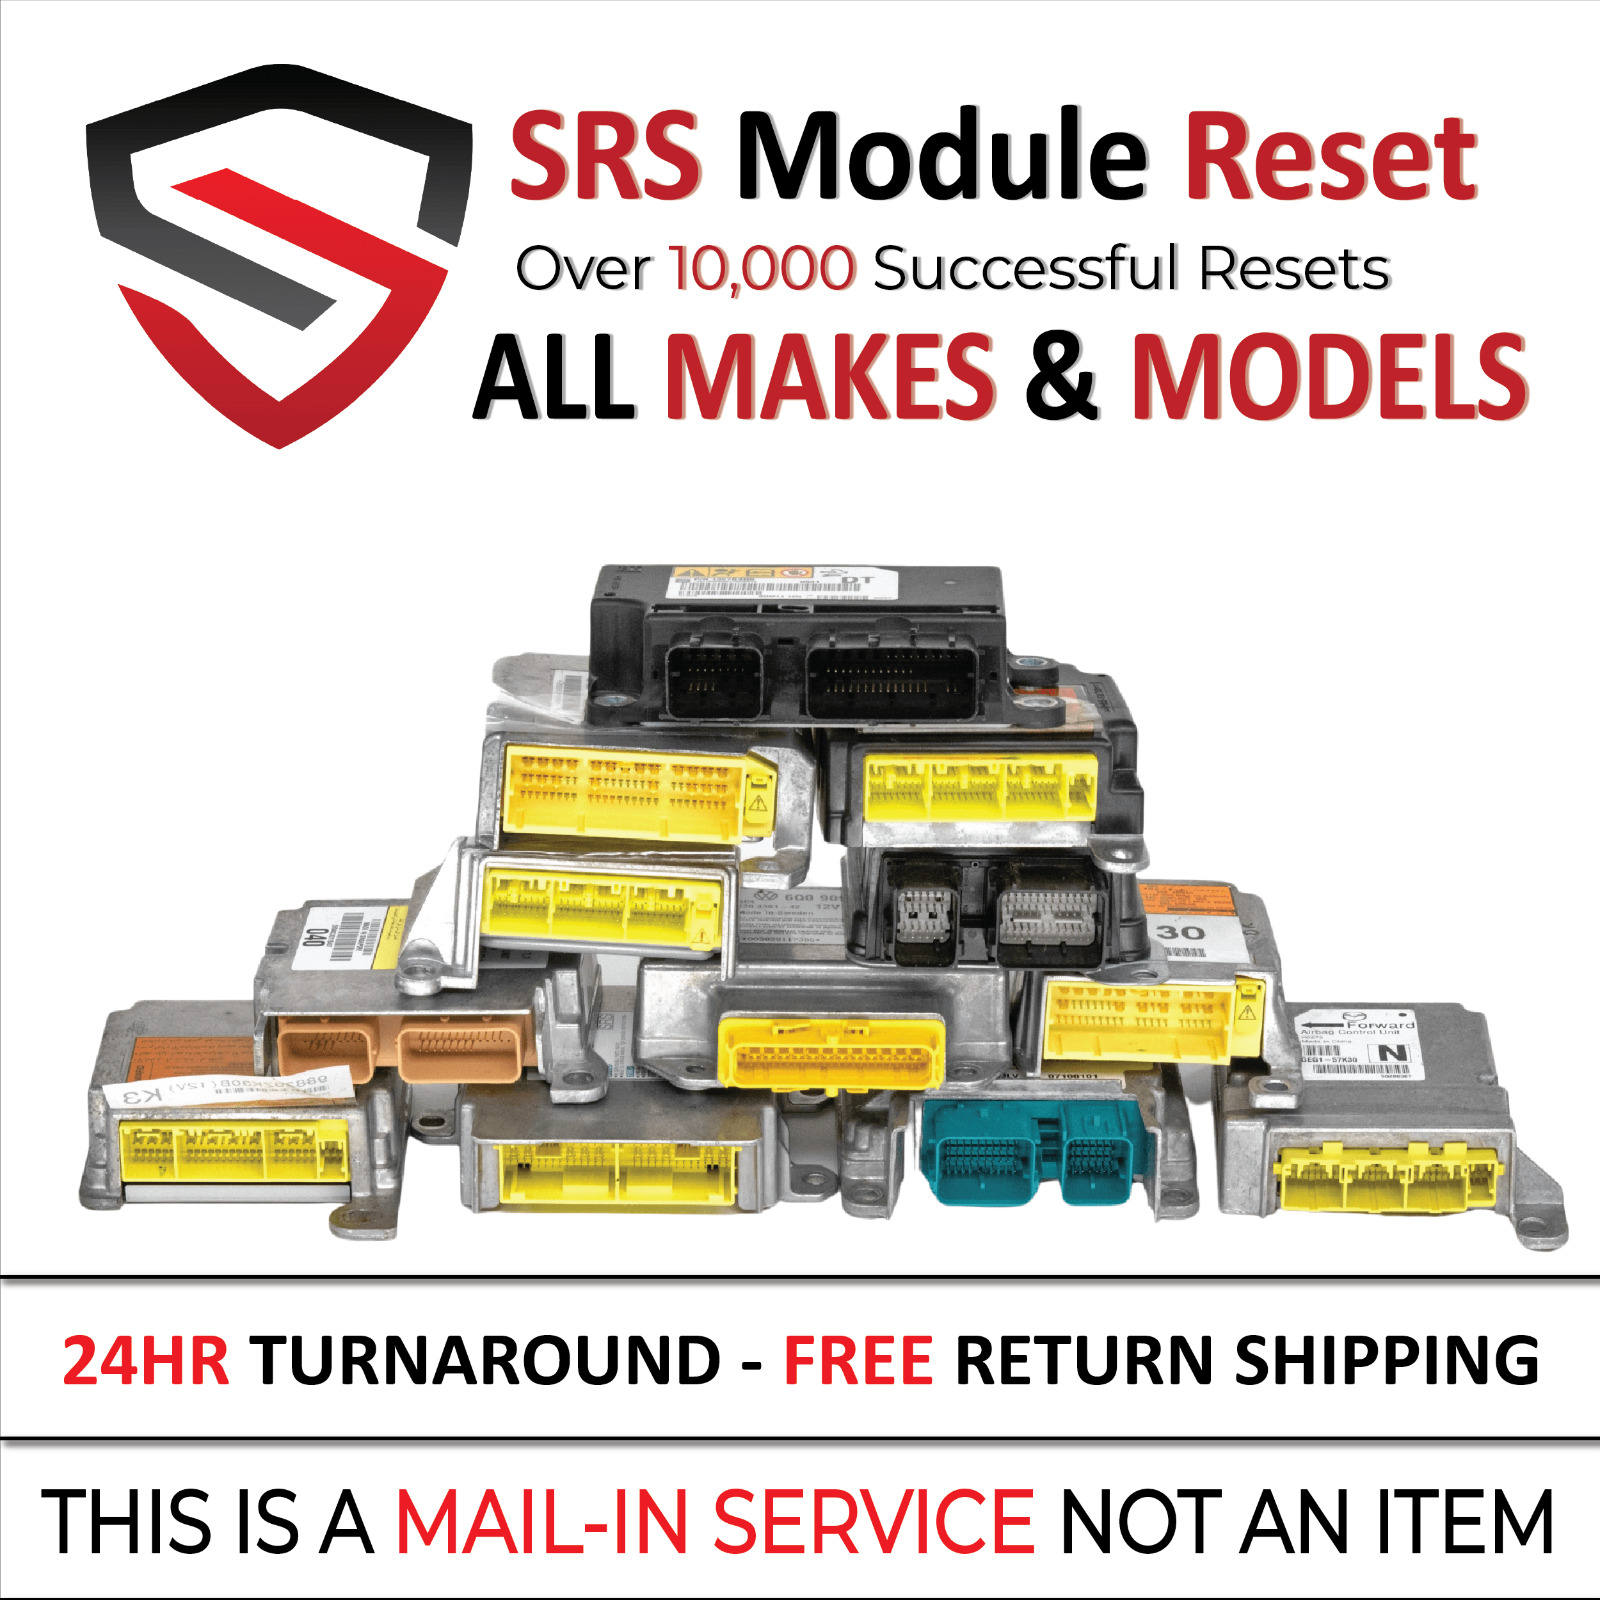 For Dodge SRS Module Reset Service - Guaranteed or Your Money Back